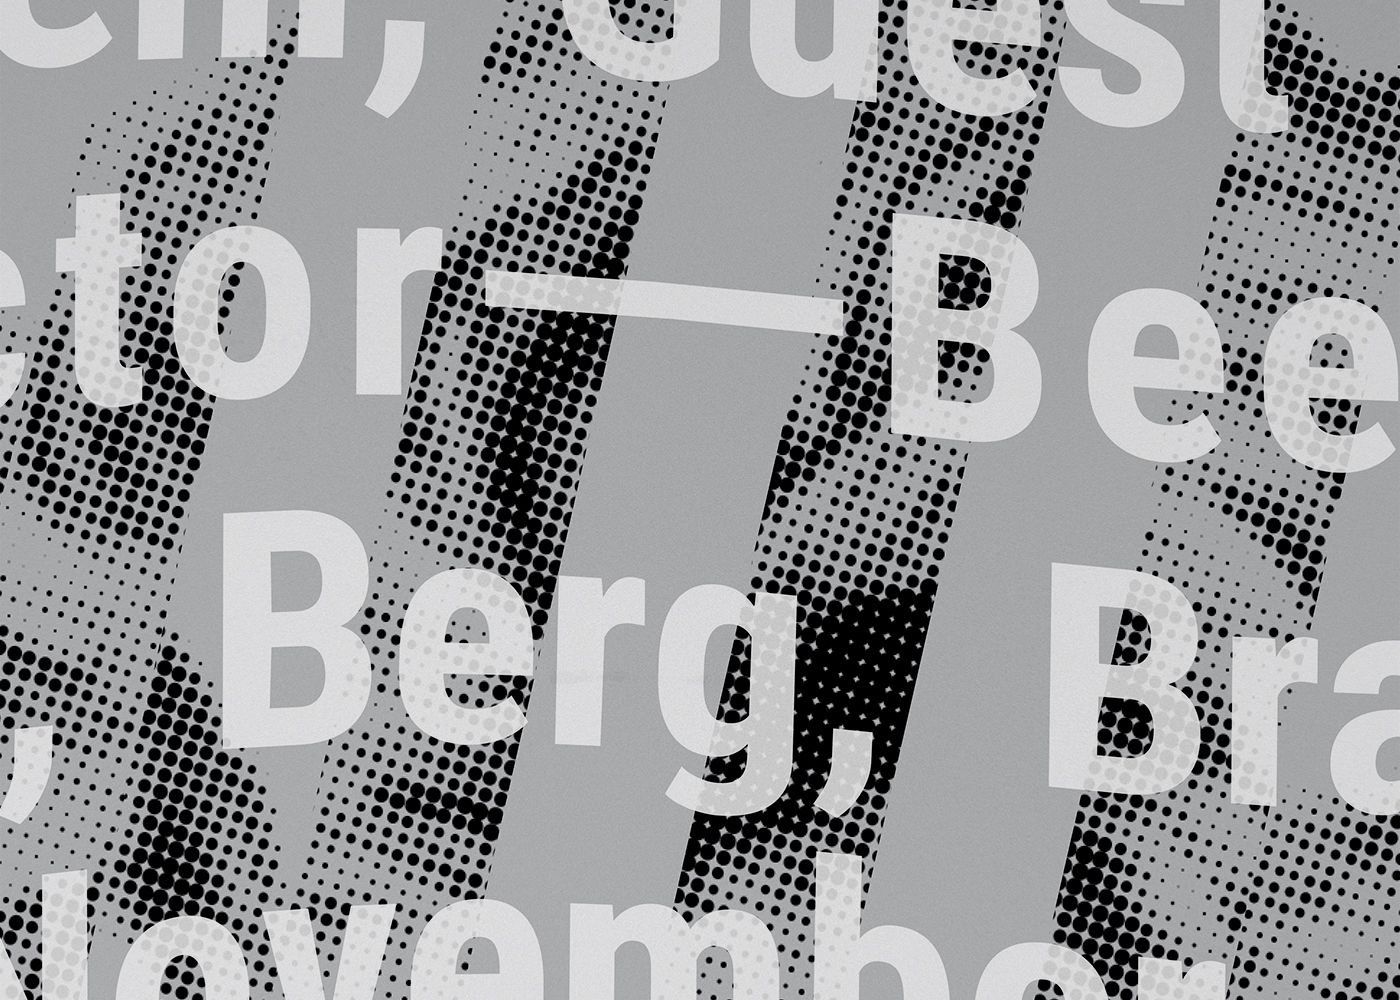 Detail of poster for Three Viennese Bees: collaged images of Beethoven, Berg, and Brahms on a gray background, overlaid with wavy white typography.